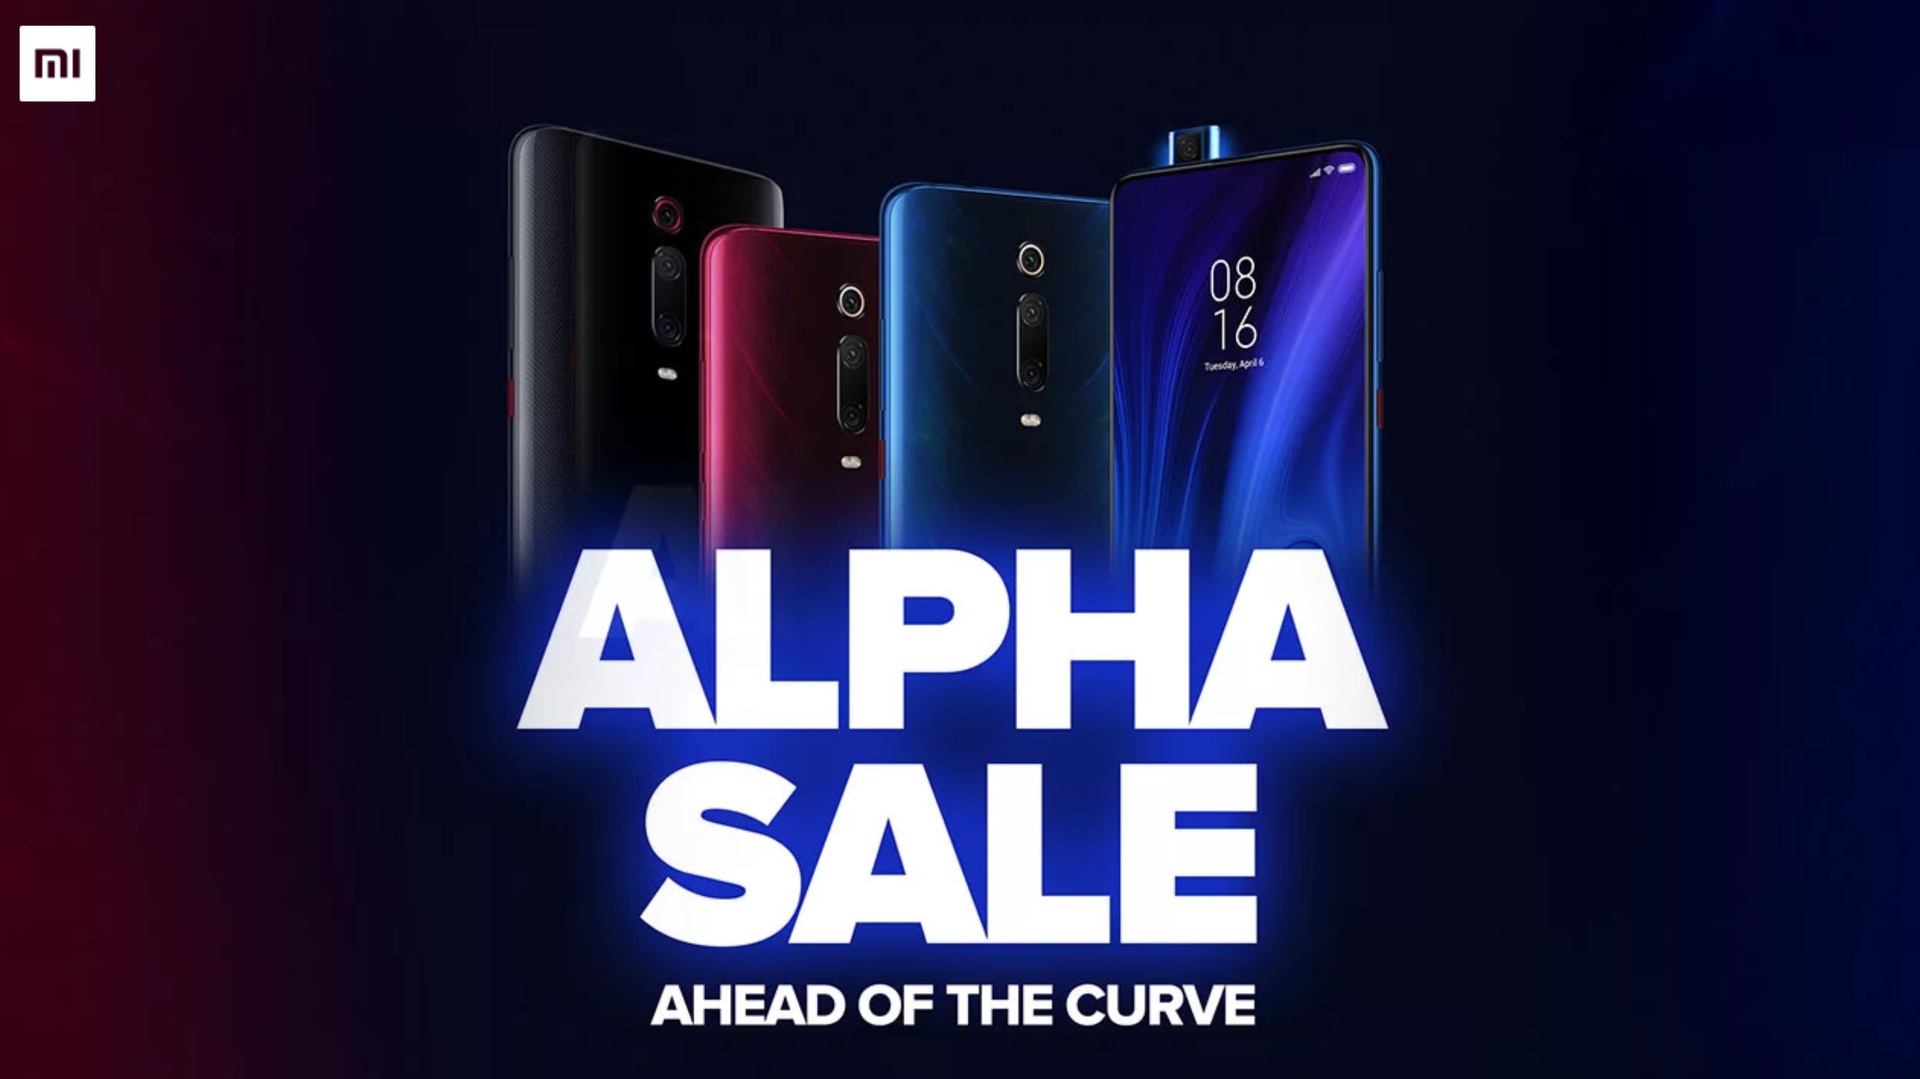 Xiaomi K20 series Alpha Sale promo poster featuring four devices.